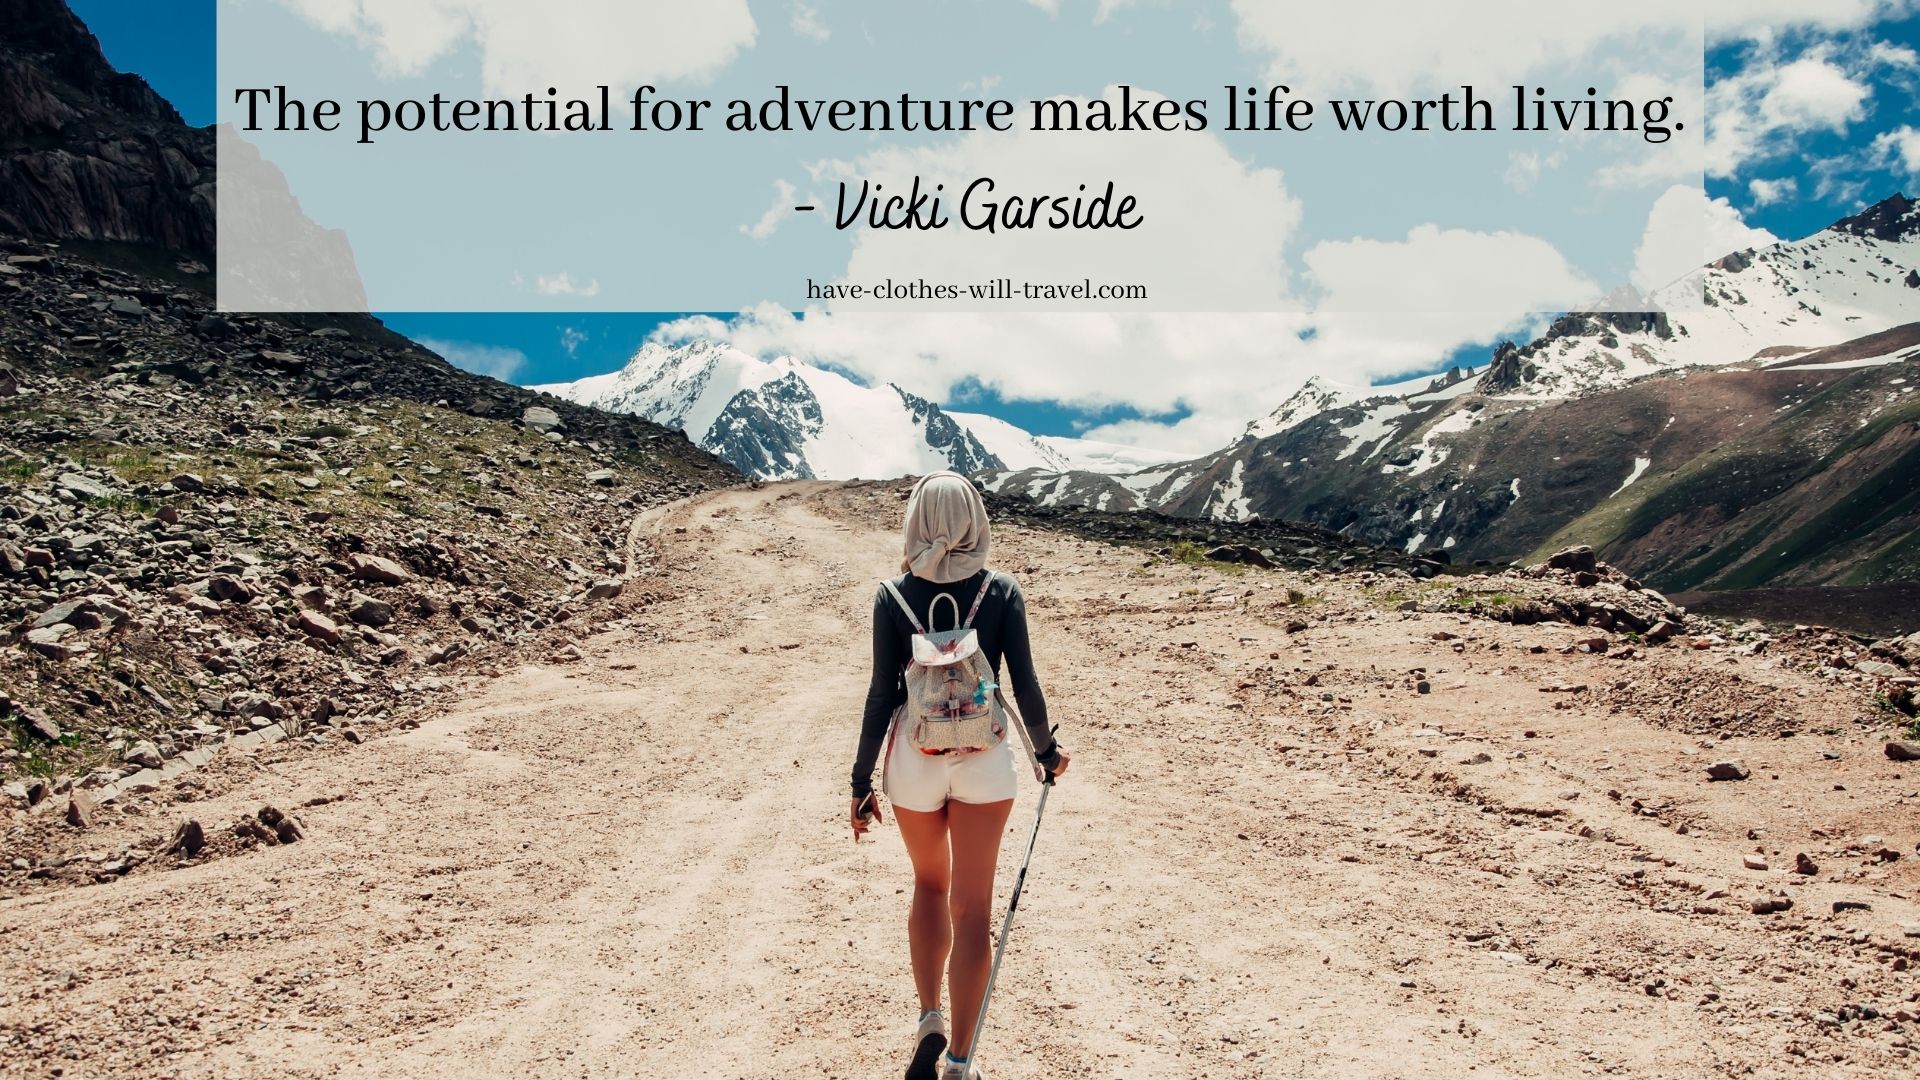 100+ Incredible Exploration Quotes to Inspire You & Fuel Your Wanderlust